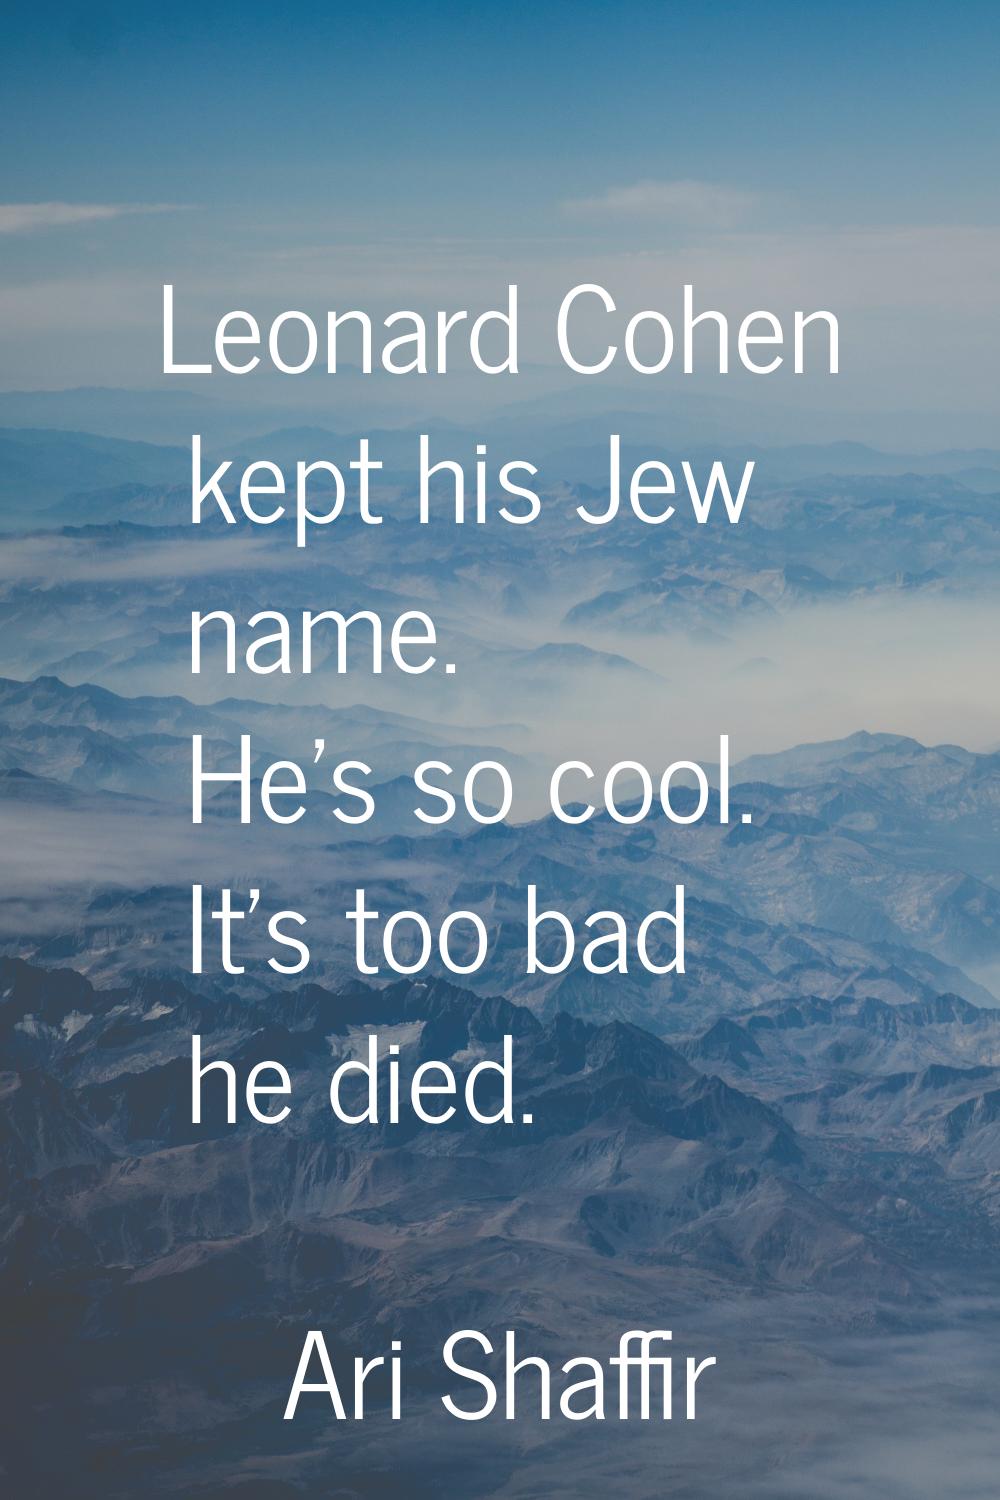 Leonard Cohen kept his Jew name. He's so cool. It's too bad he died.